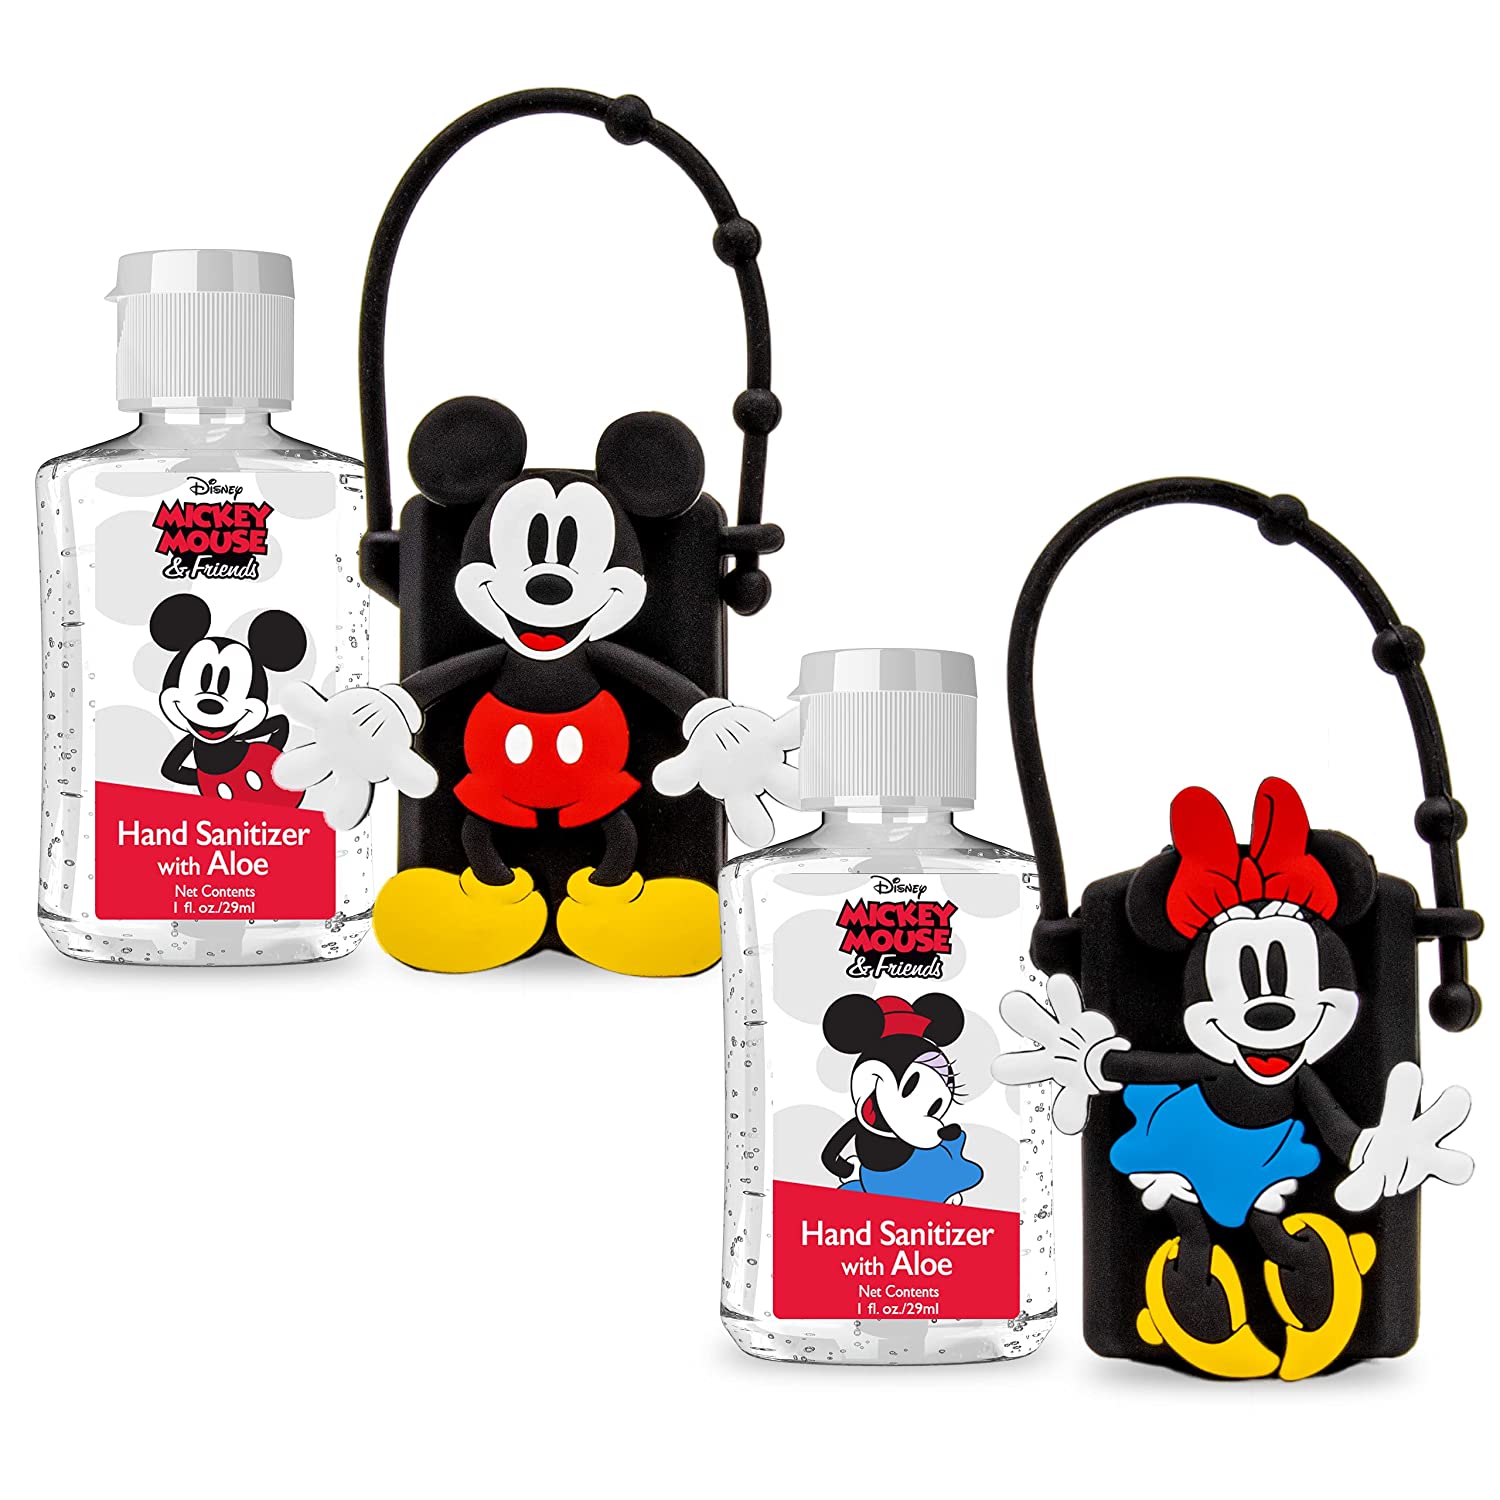 Disney Store Portable Hand Sanitizer - Pack of 2 Travel Size, Refillable  Sanitizers w/Holders and Clip - Mickey and Minnie - AllEars.Net